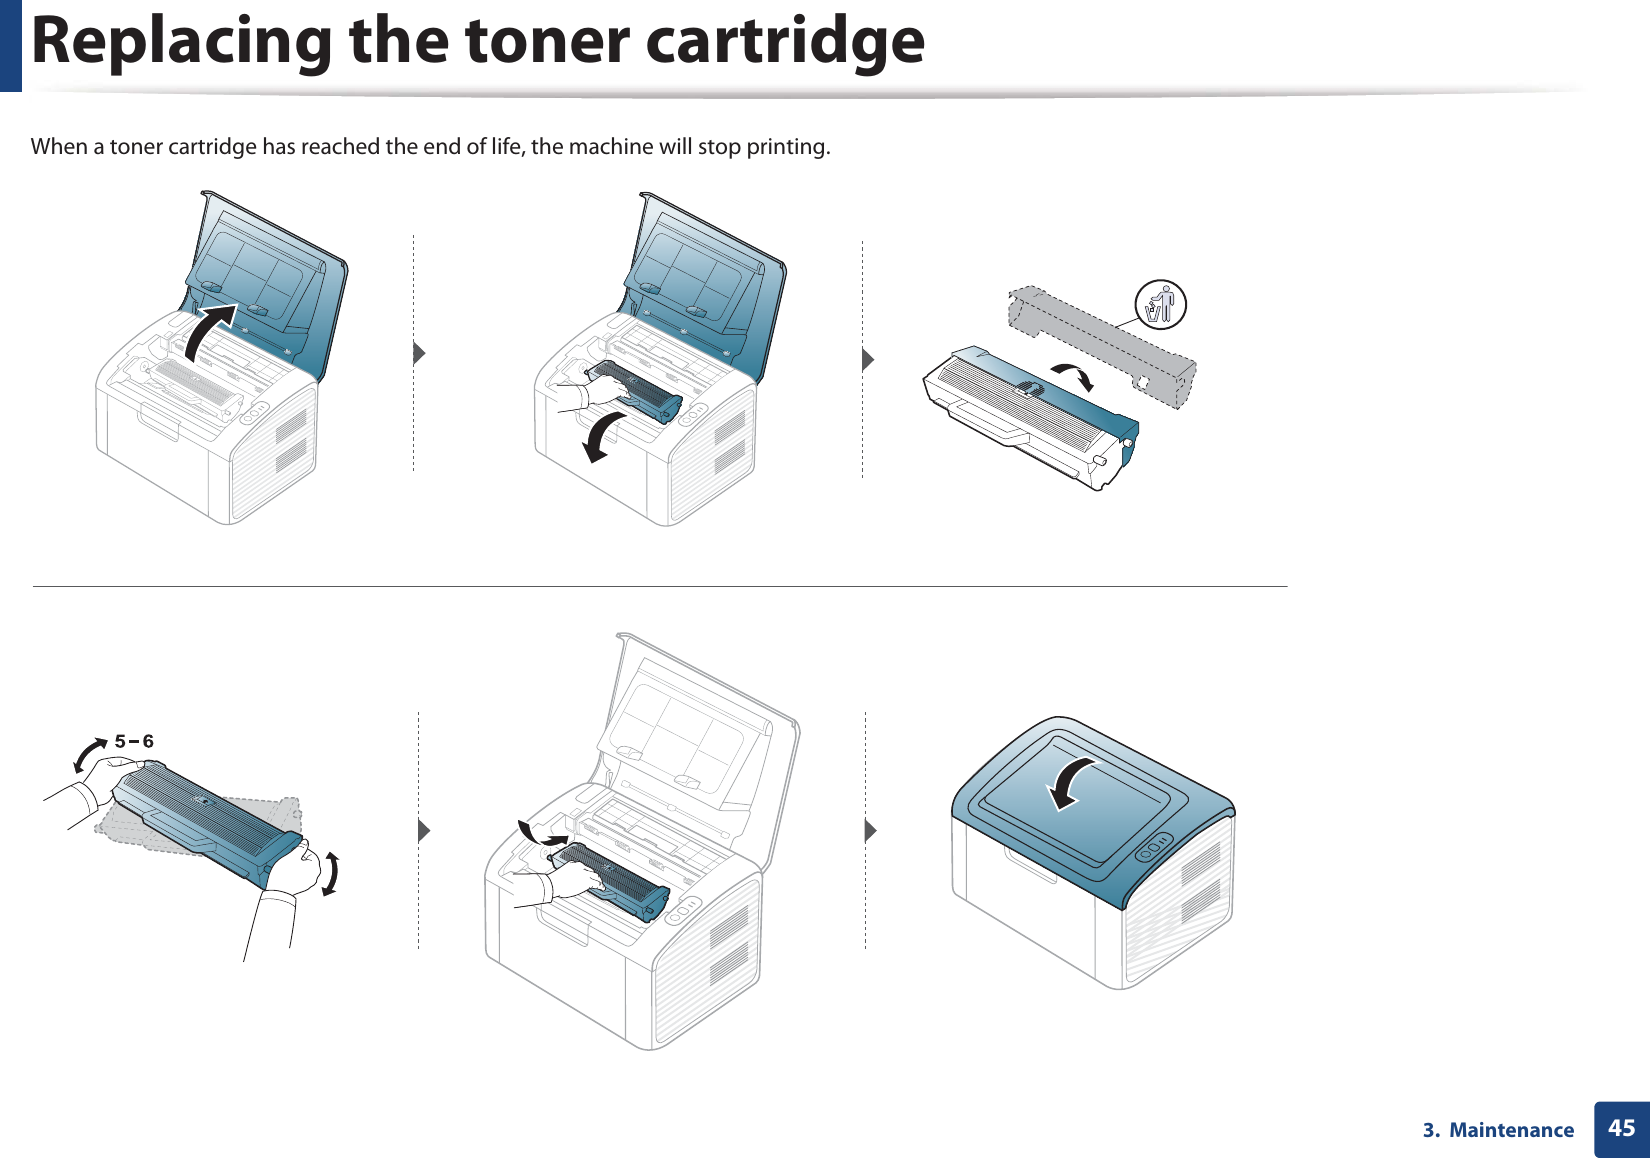 Replacing the toner cartridge453.  MaintenanceWhen a toner cartridge has reached the end of life, the machine will stop printing.